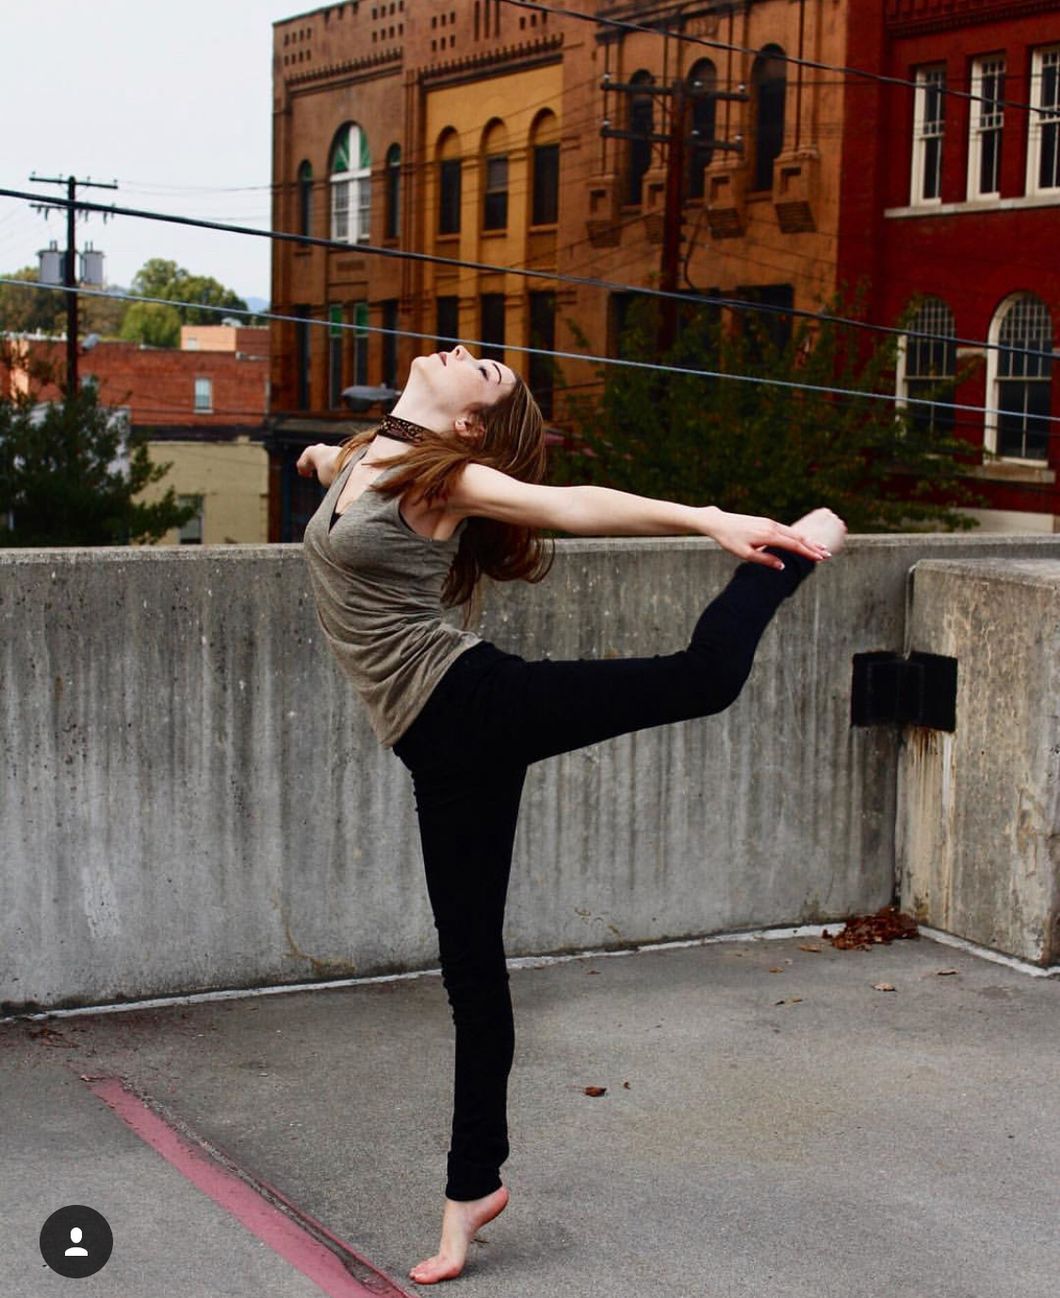 17 Things You'll Only Understand If You Are – Or Ever Were – A Dancer